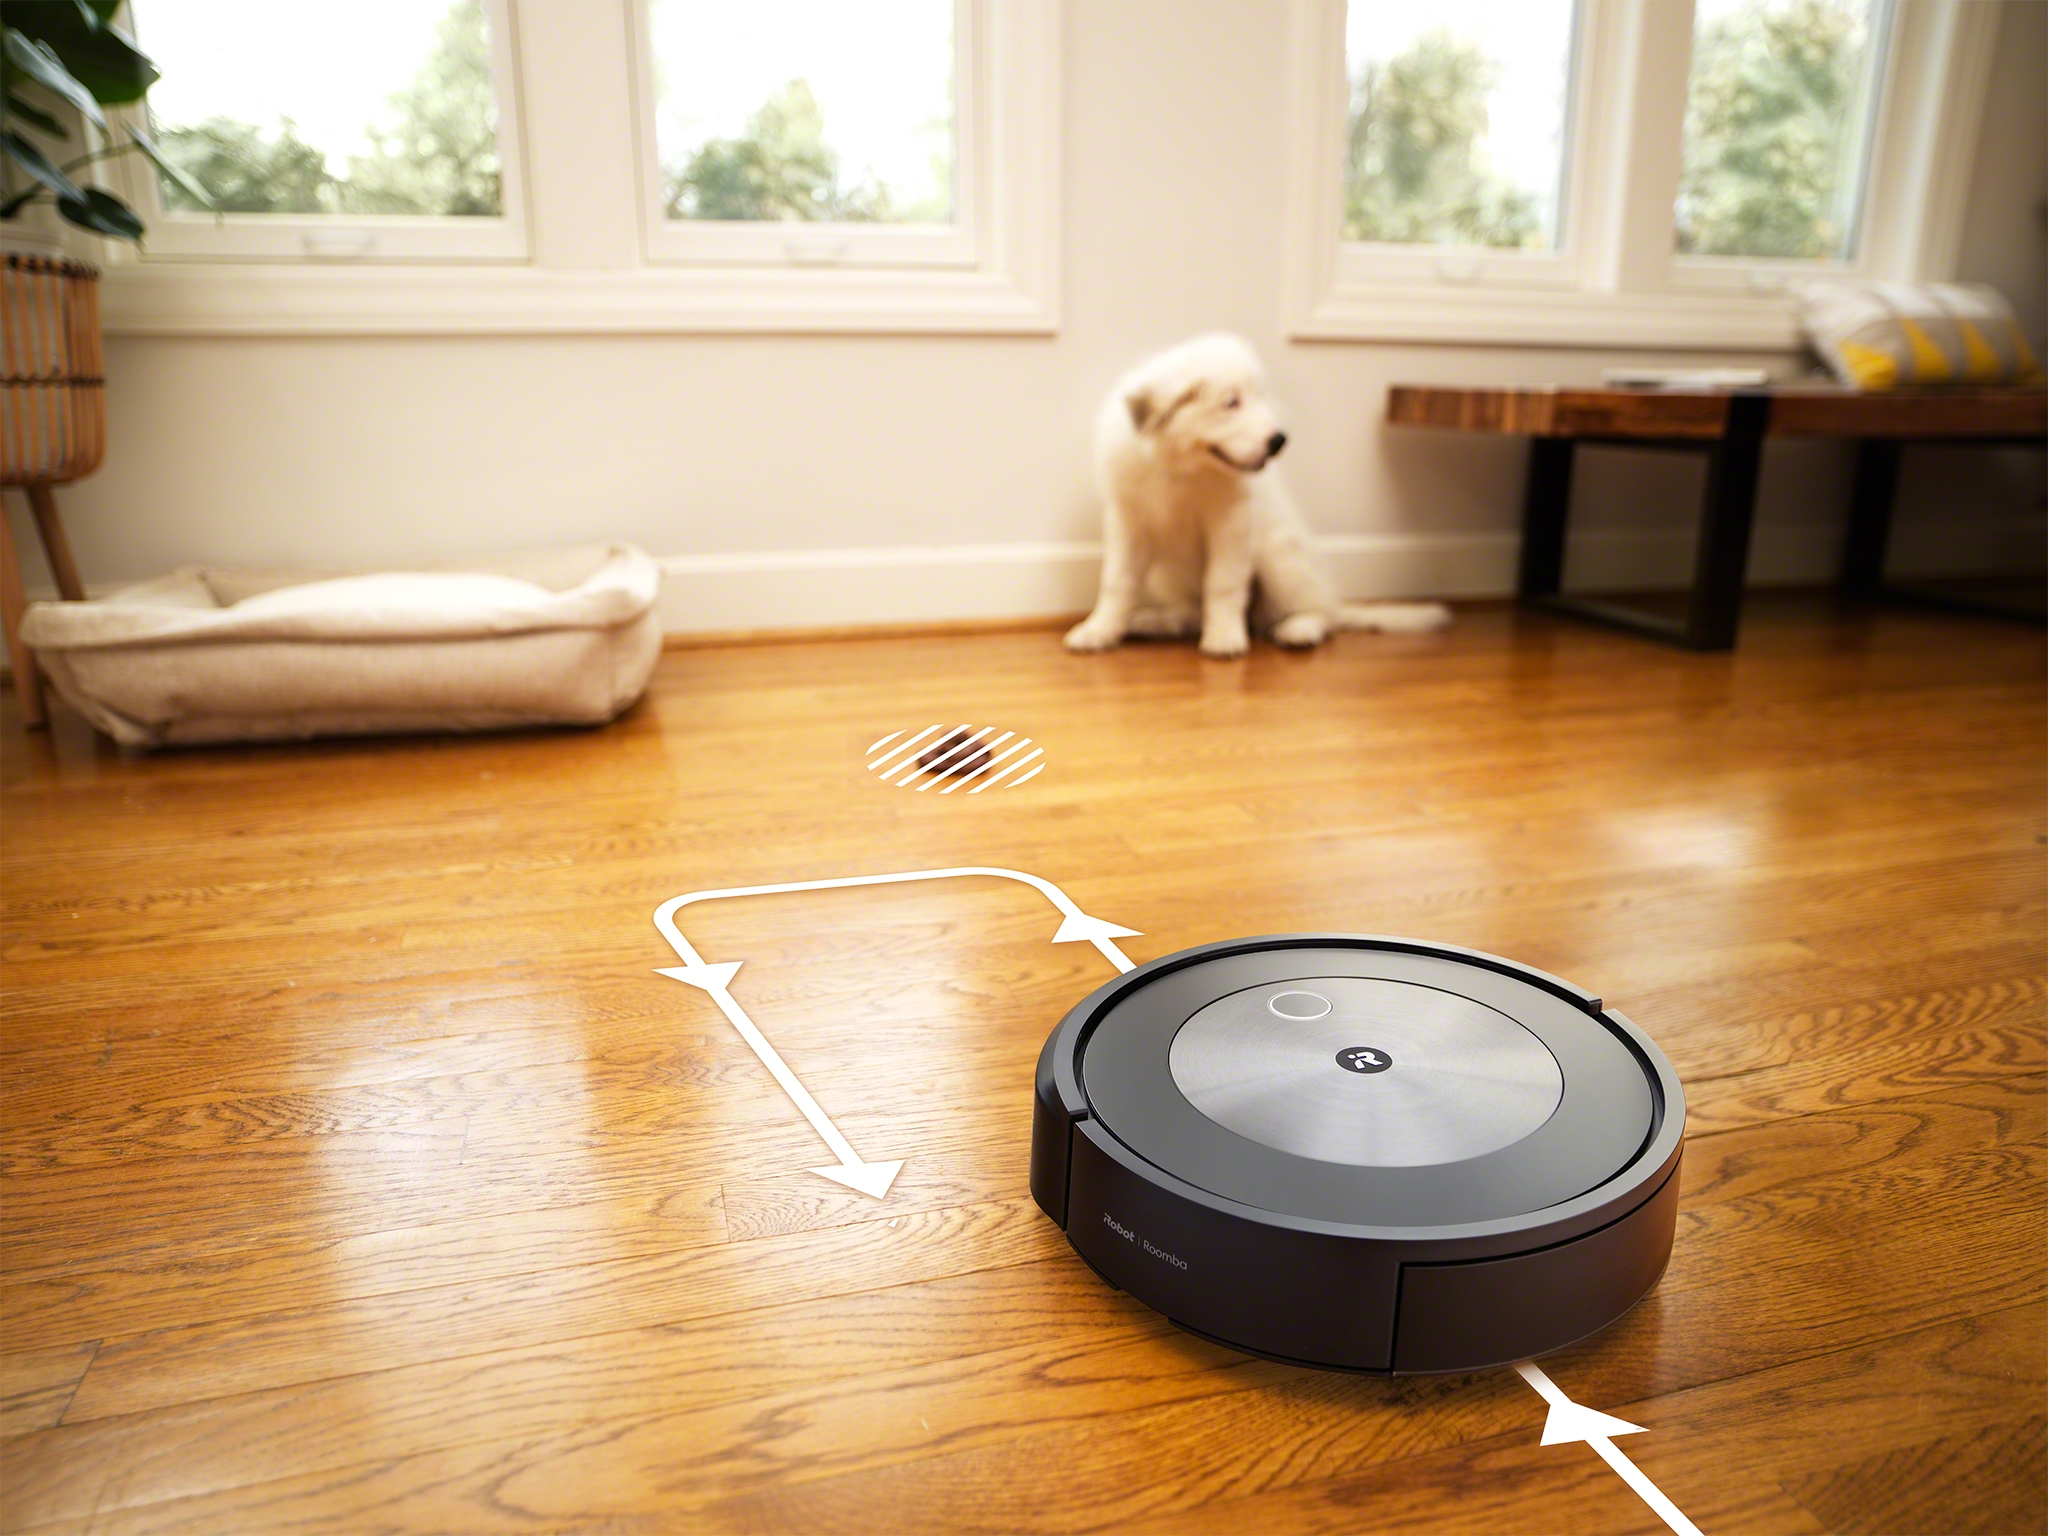 The iRobot Roomba j7+ reacts to objects in the home with PrecisionVision Navigation, giving the robot the ability to identify and avoid common obstacles, such as pet waste.